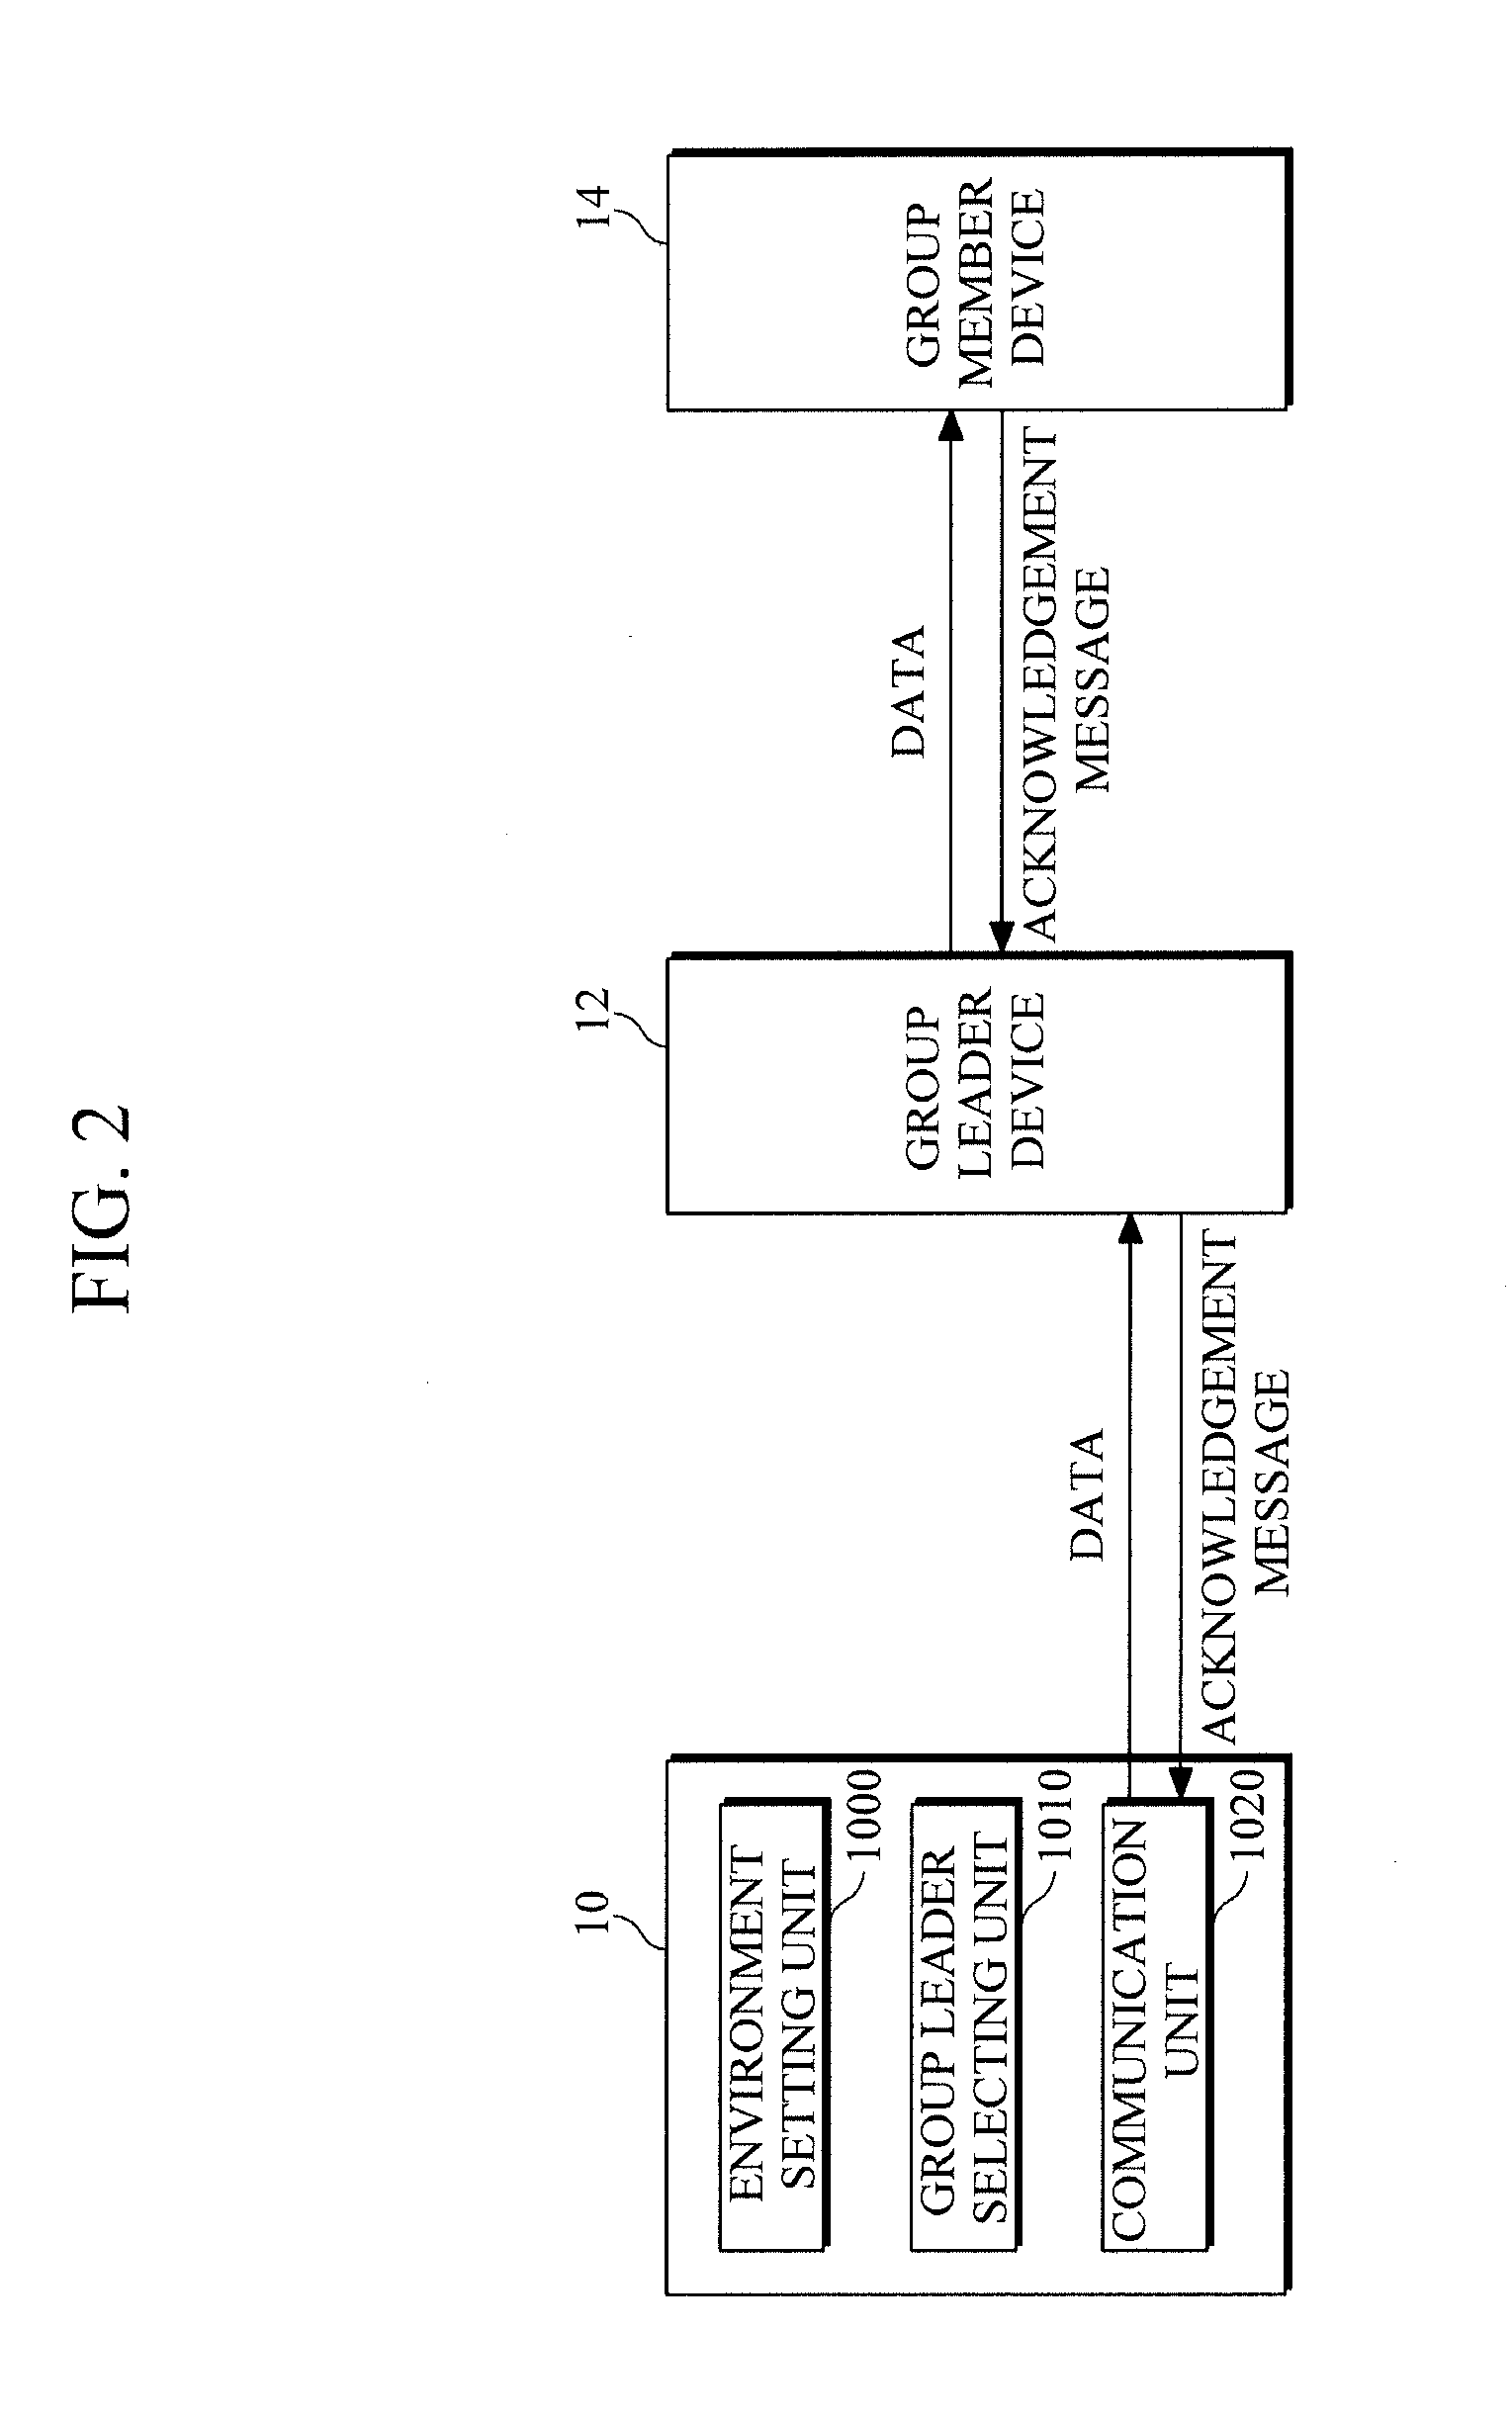 Multicast communication method, apparatus and system for intermittently connected network